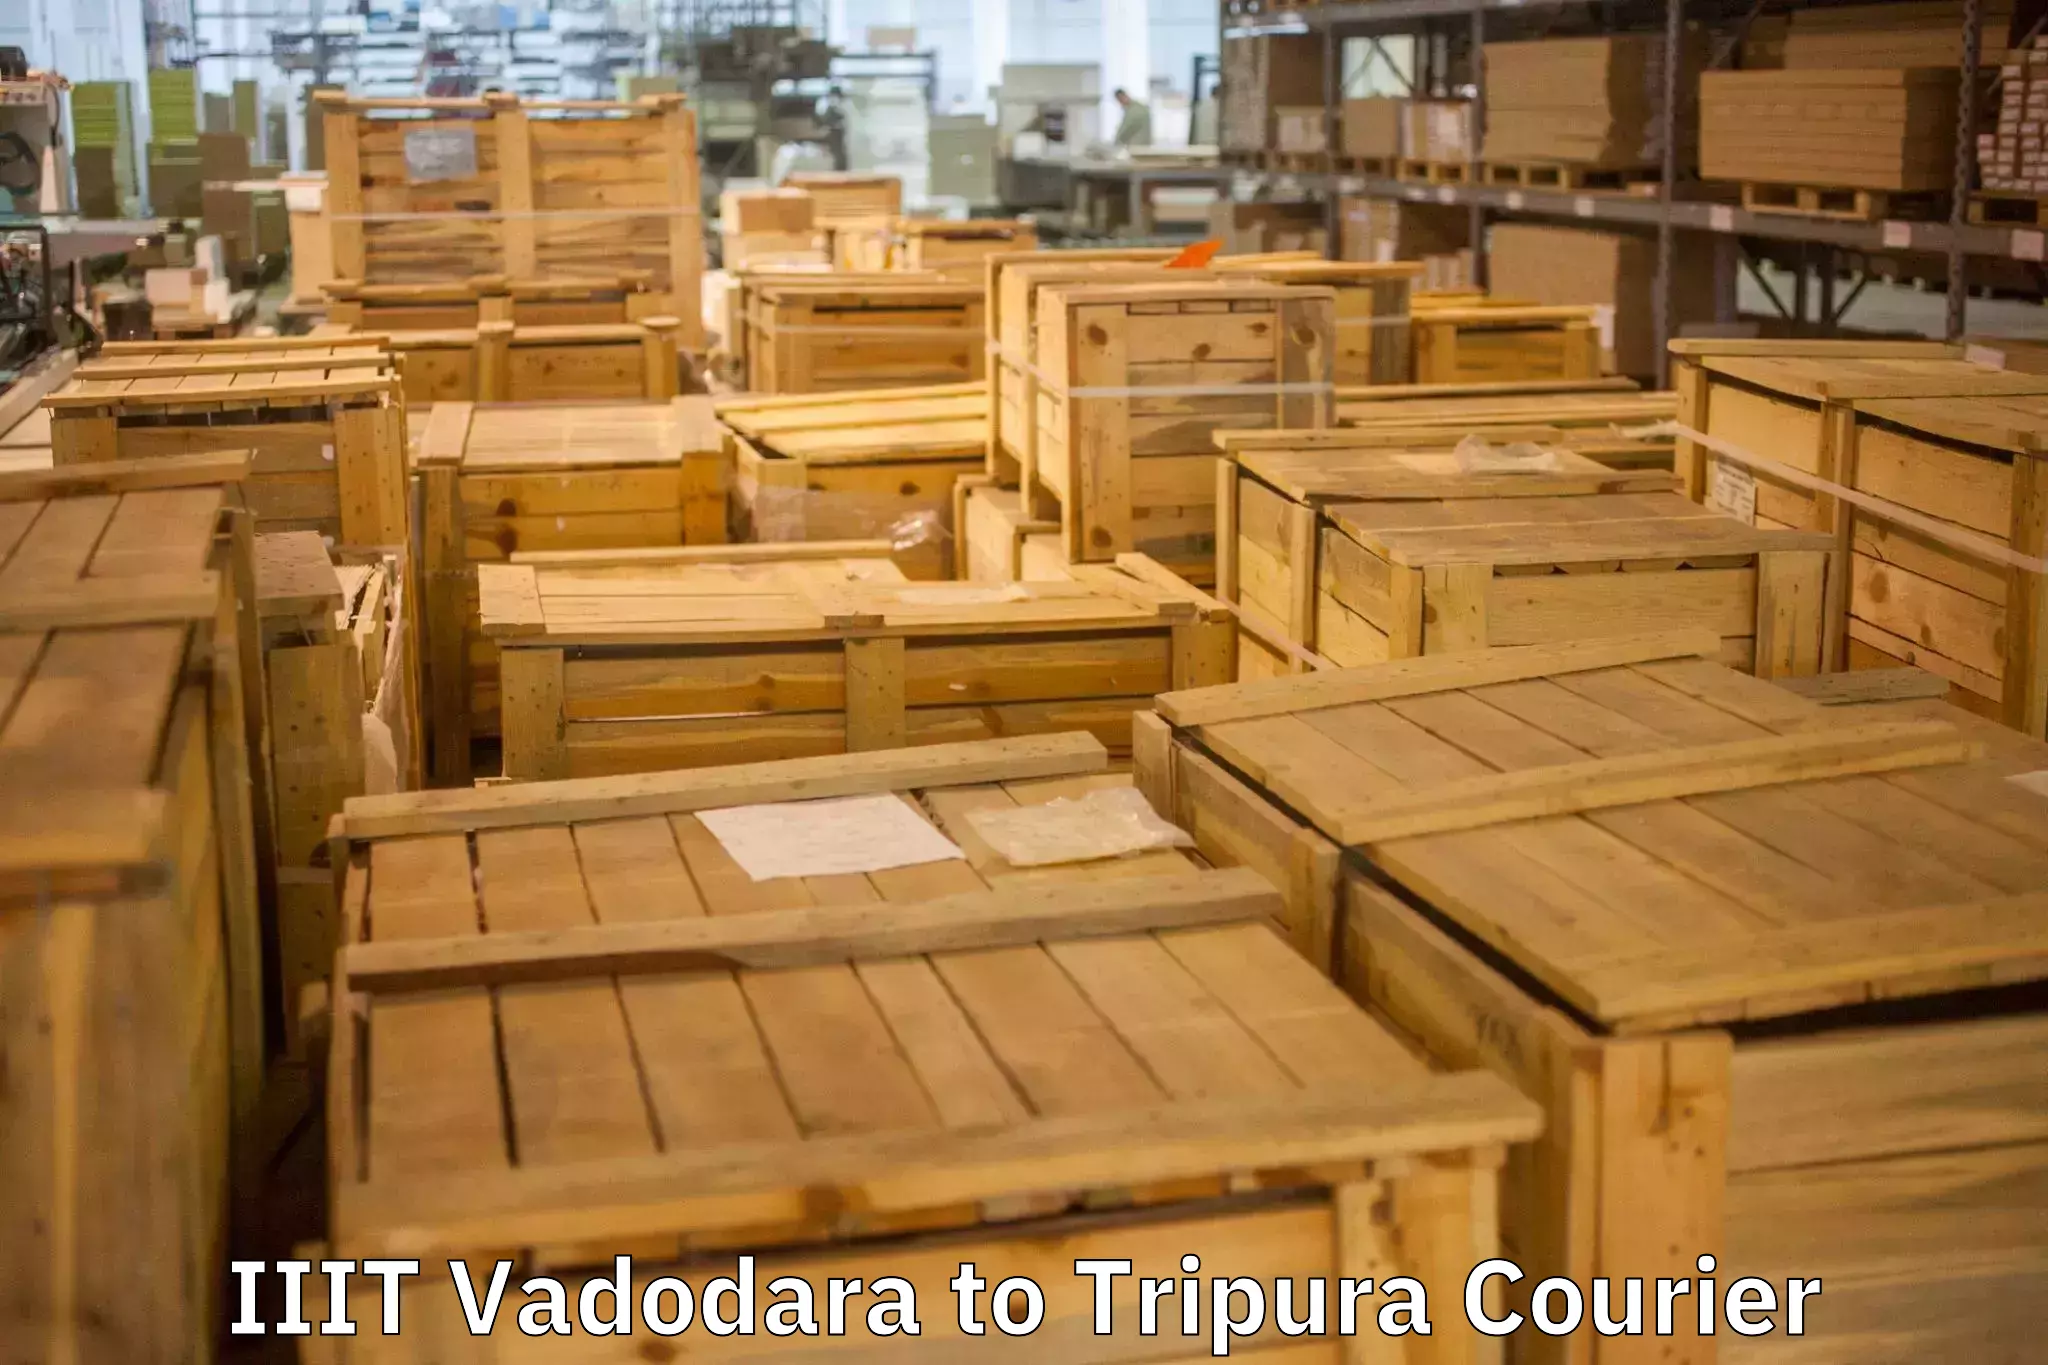 Professional movers and packers IIIT Vadodara to Udaipur Tripura